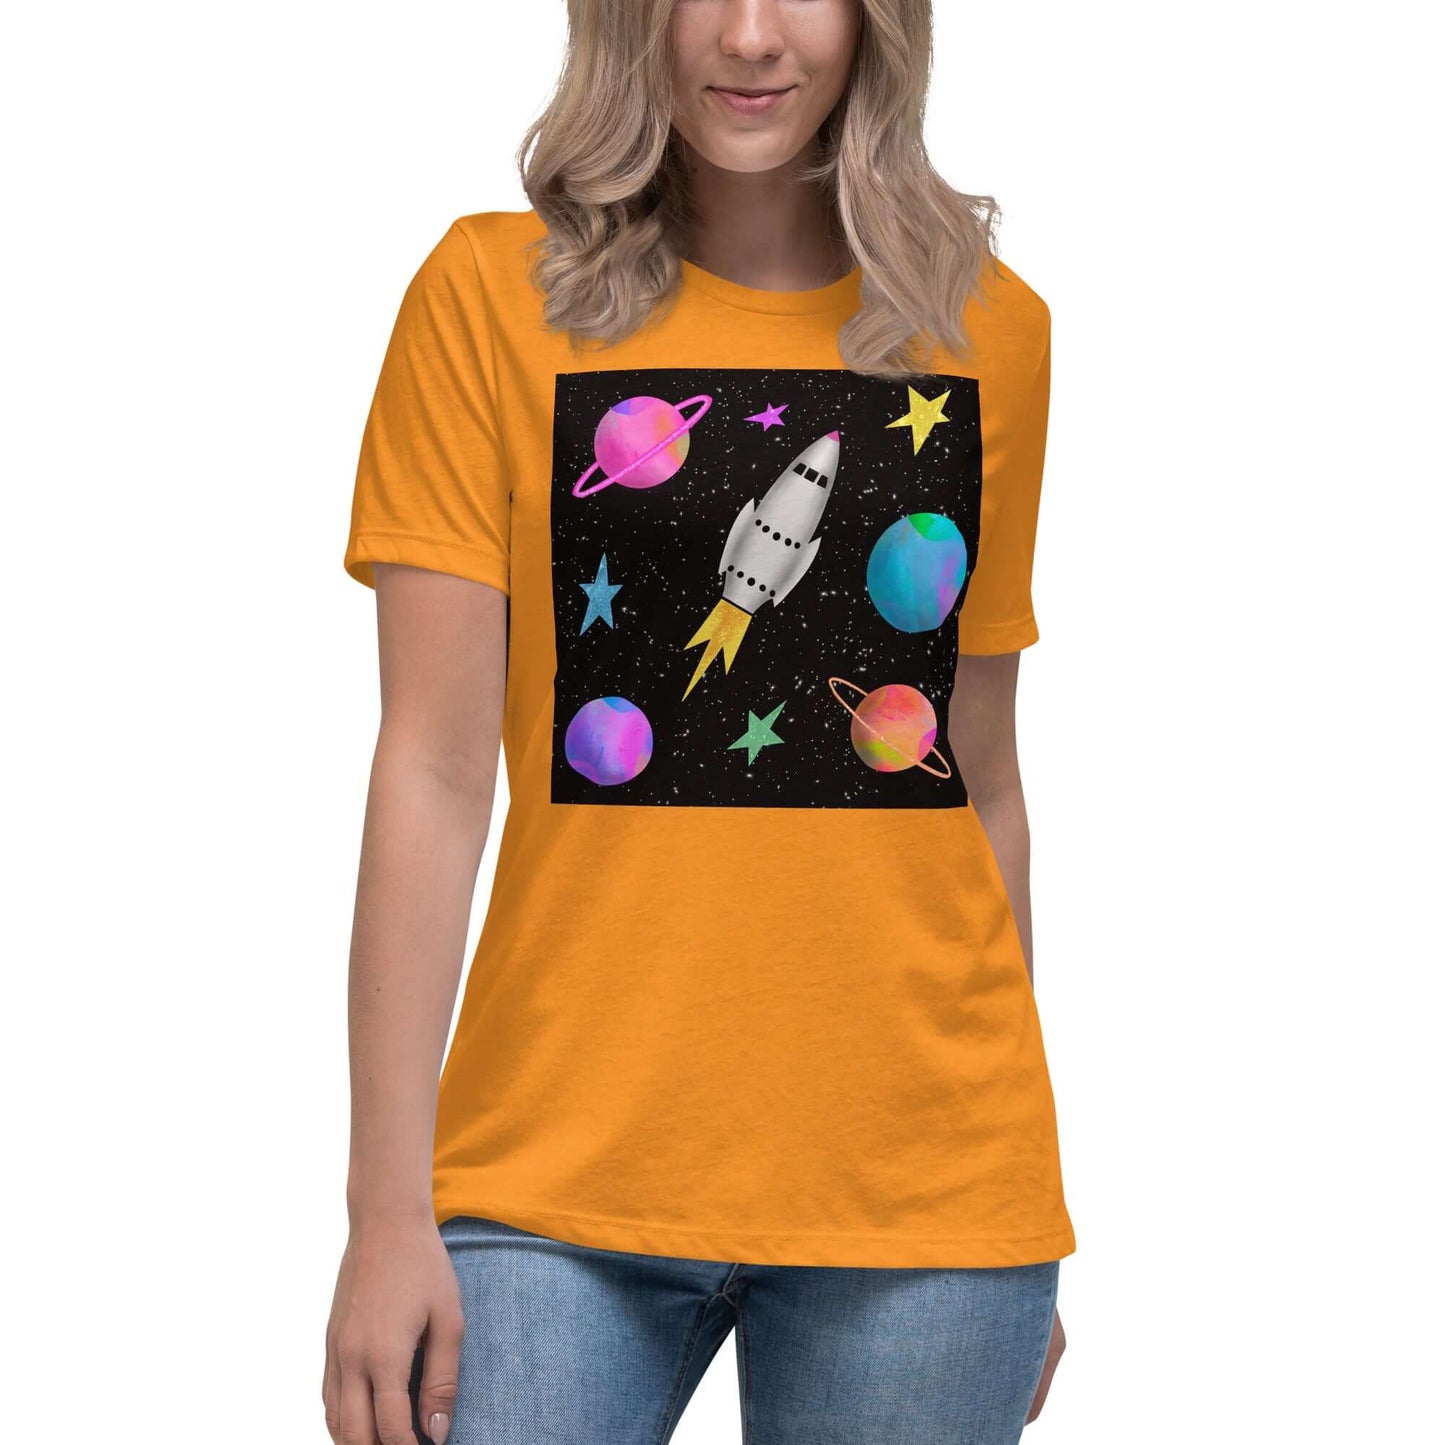 Rocket with Colorful Stars and Planets “Space Rockets” Women’s Short Sleeve Tee in Heather Marmalade